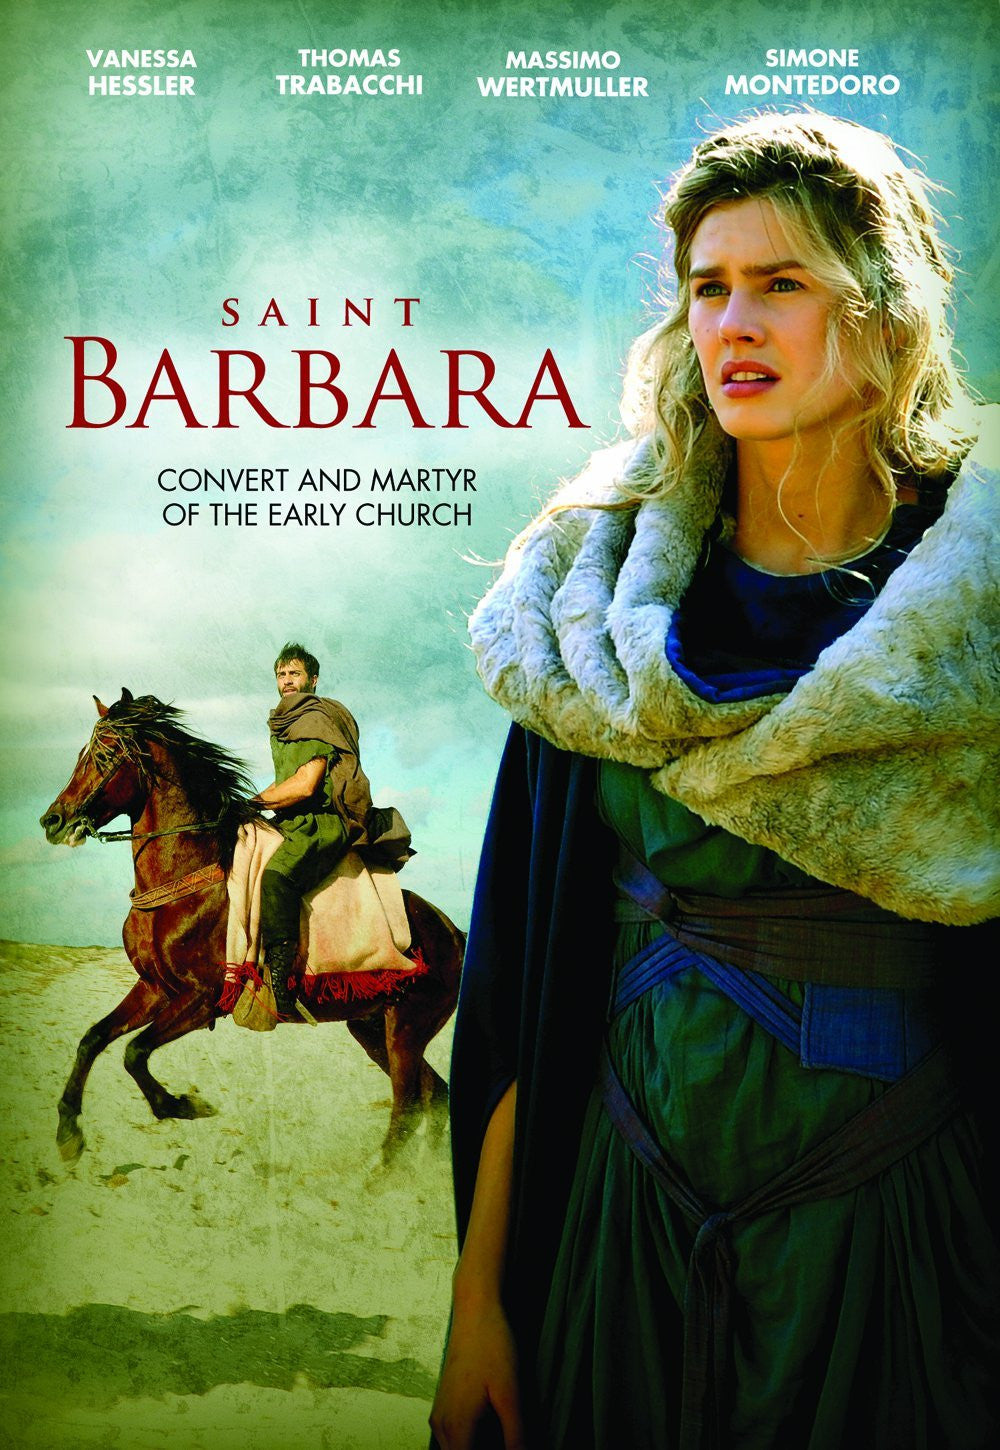 Saint Barbara: Convert and Martyr of the Early Church (DVD)